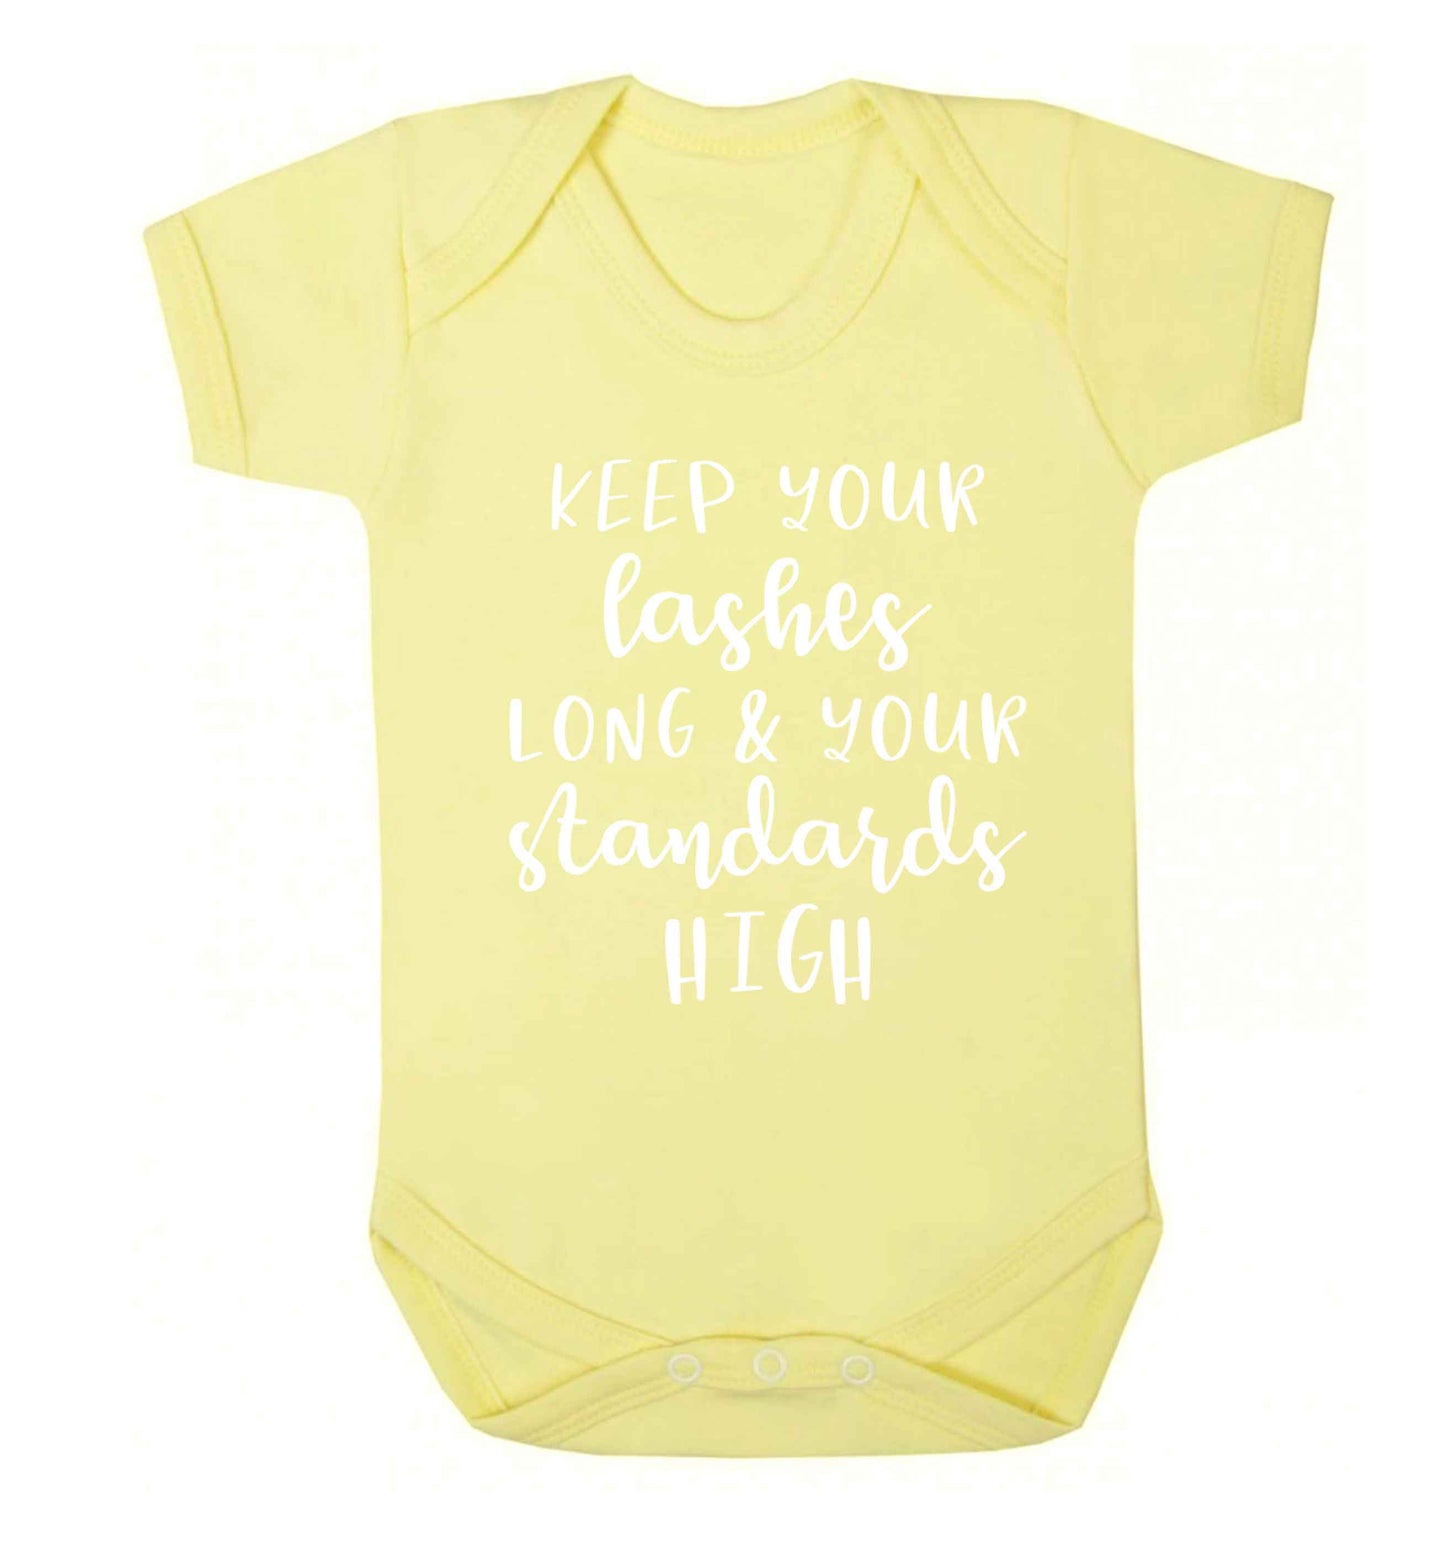 Keep your lashes long and your standards high Baby Vest pale yellow 18-24 months